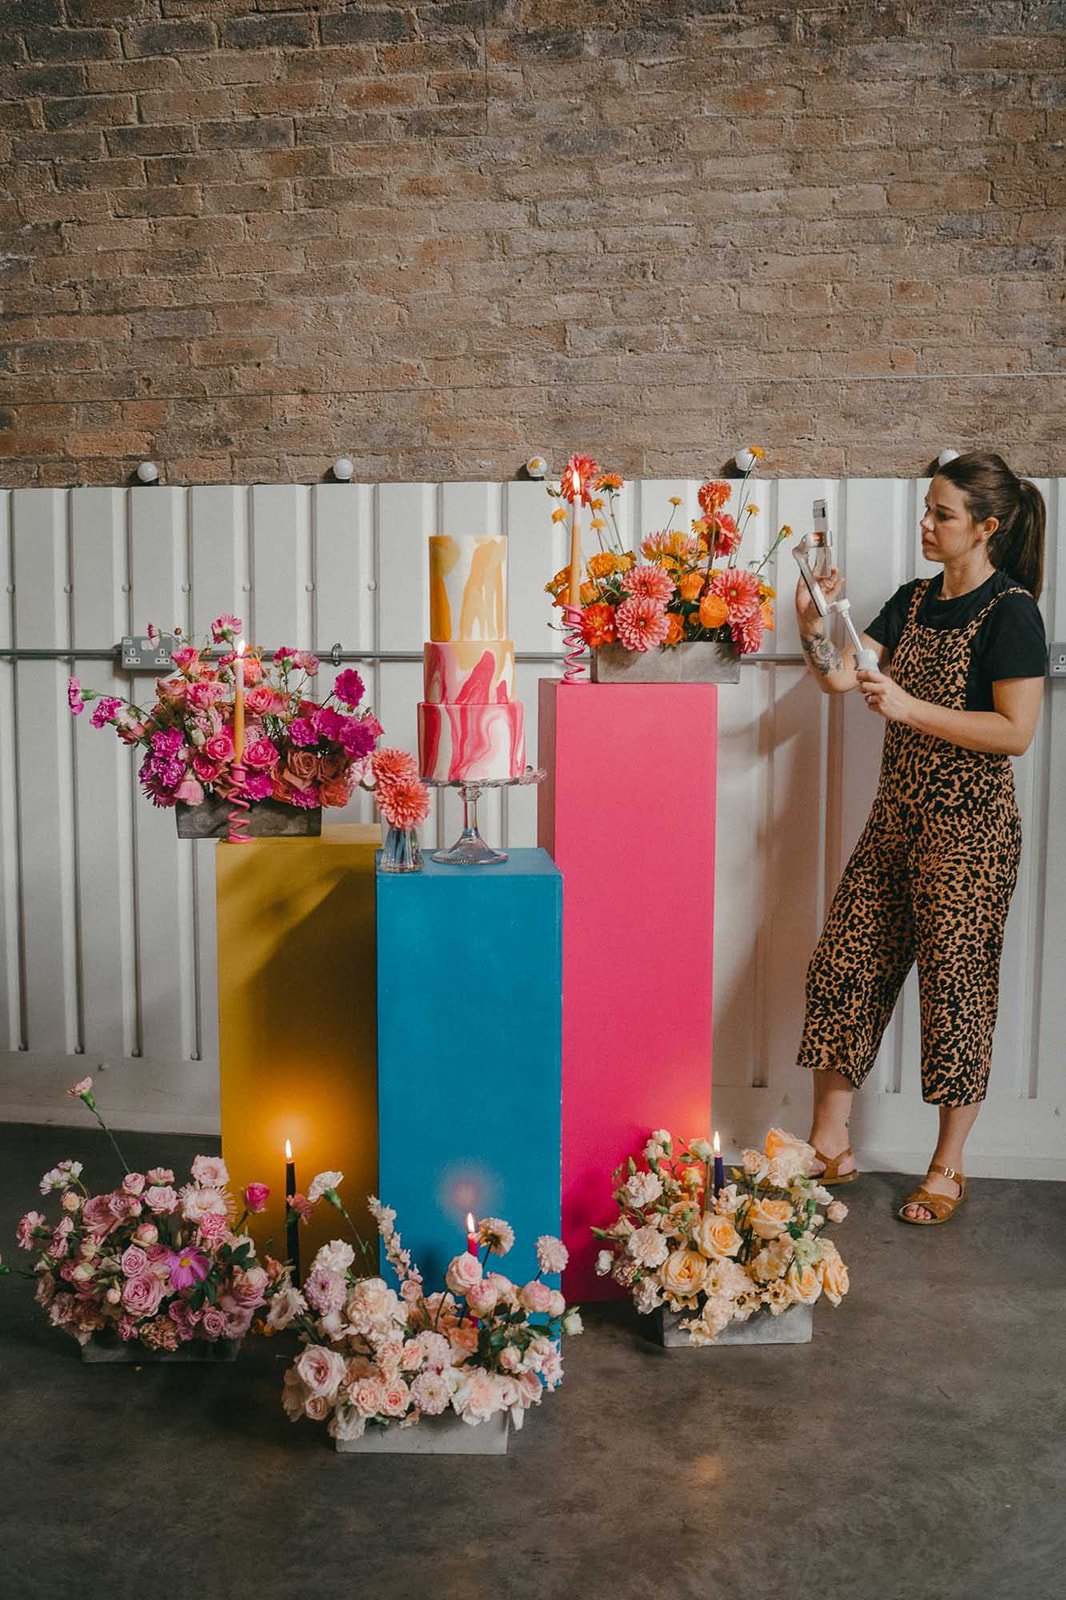  A behind the scenes moment captured by wedding content creator of florals and wedding cake being set up and displayed on bright plinths.   Photo by: Josephine Elvis 